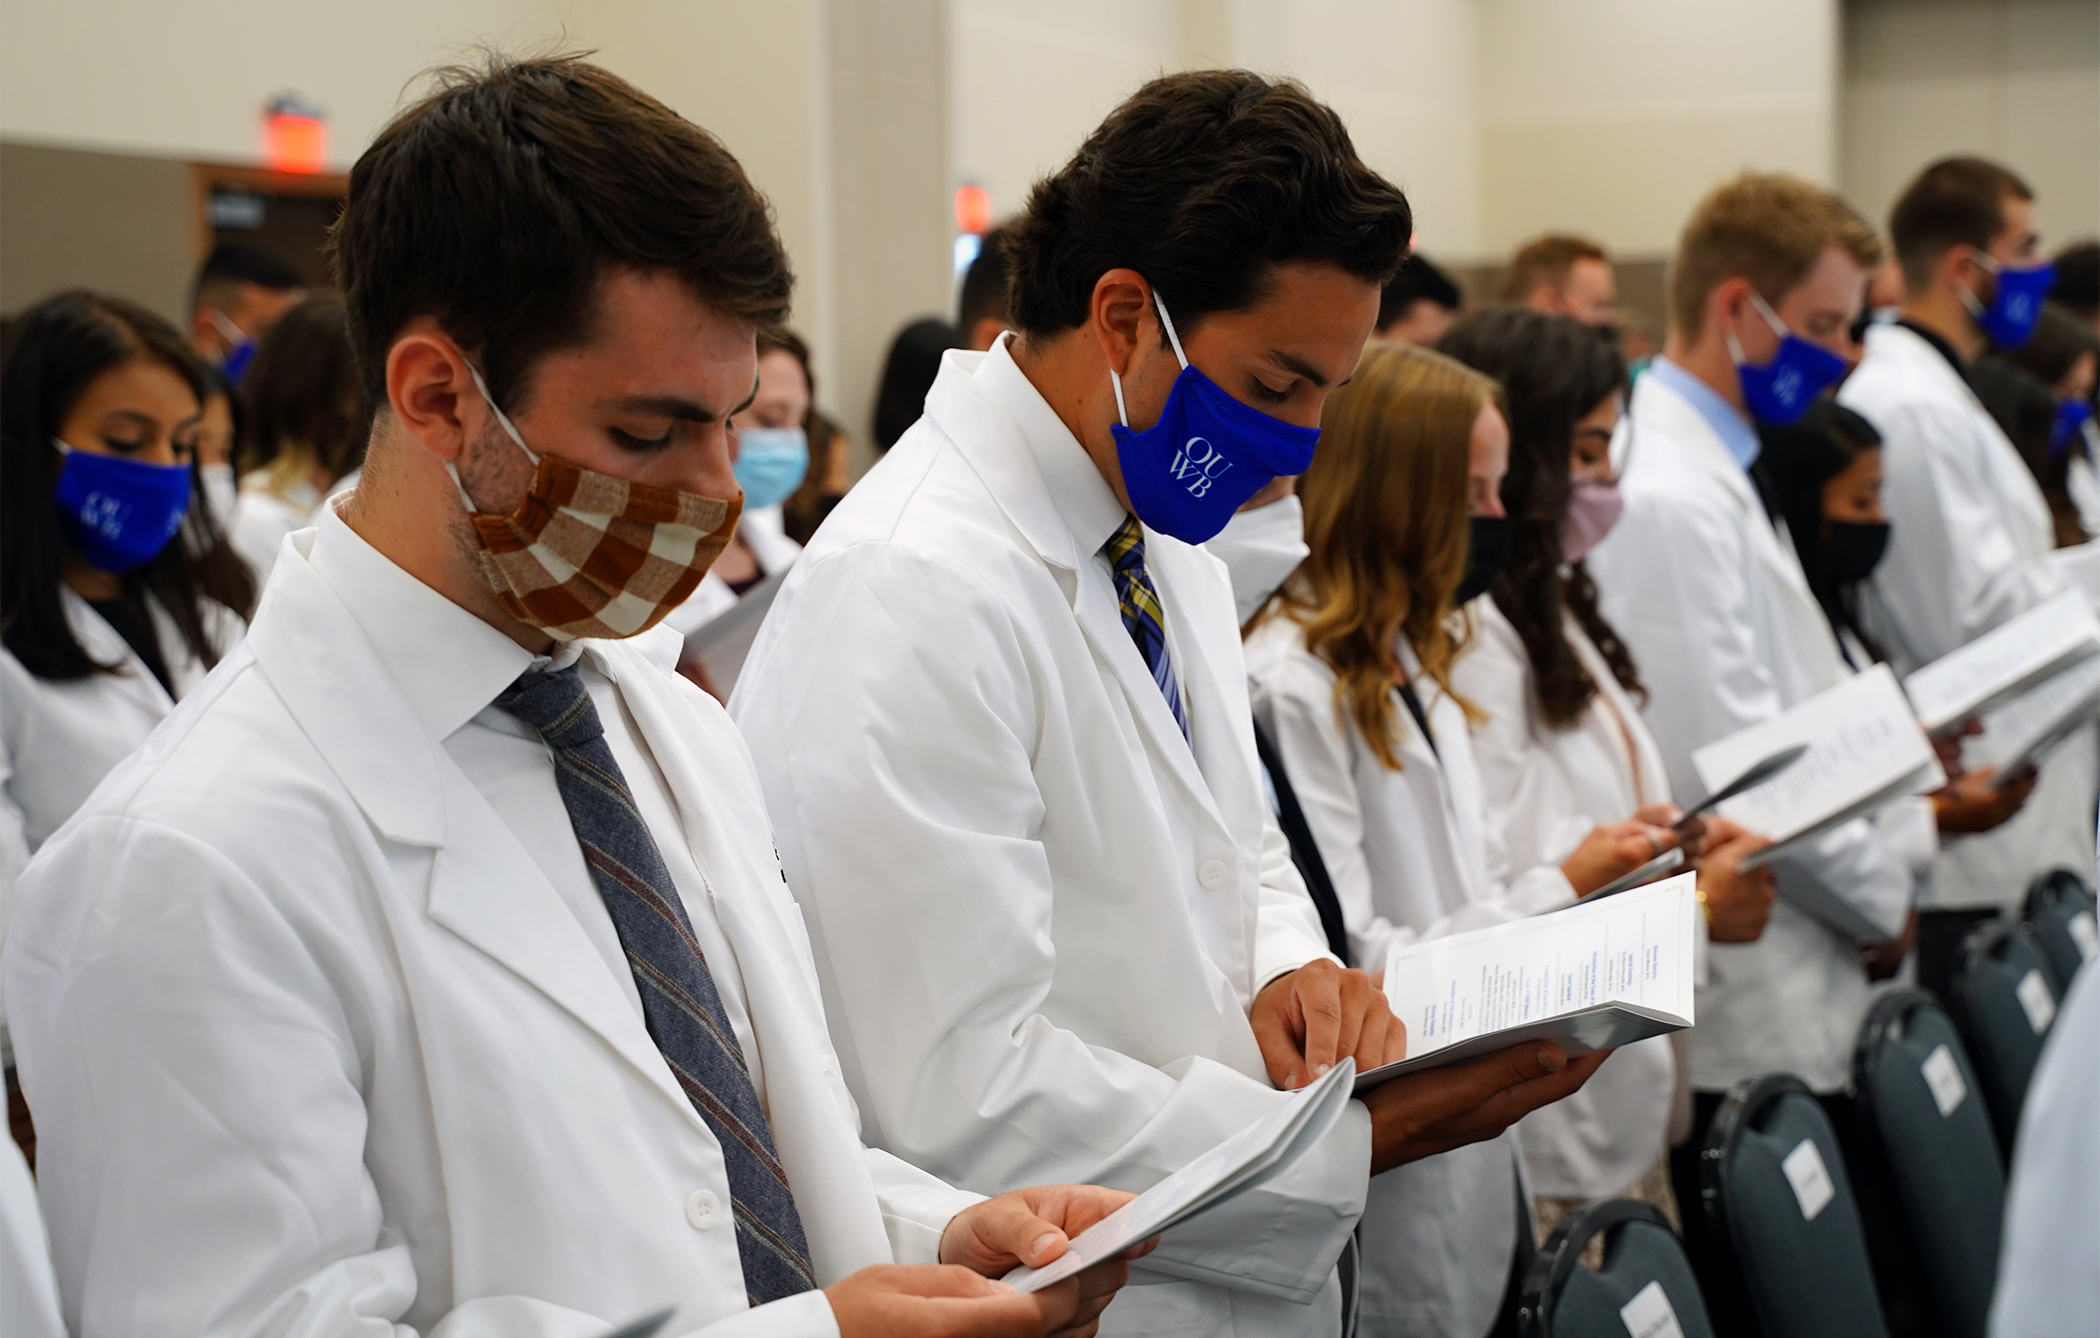 White Coat Ceremony launches medical school journey for OUWB Class of 2025